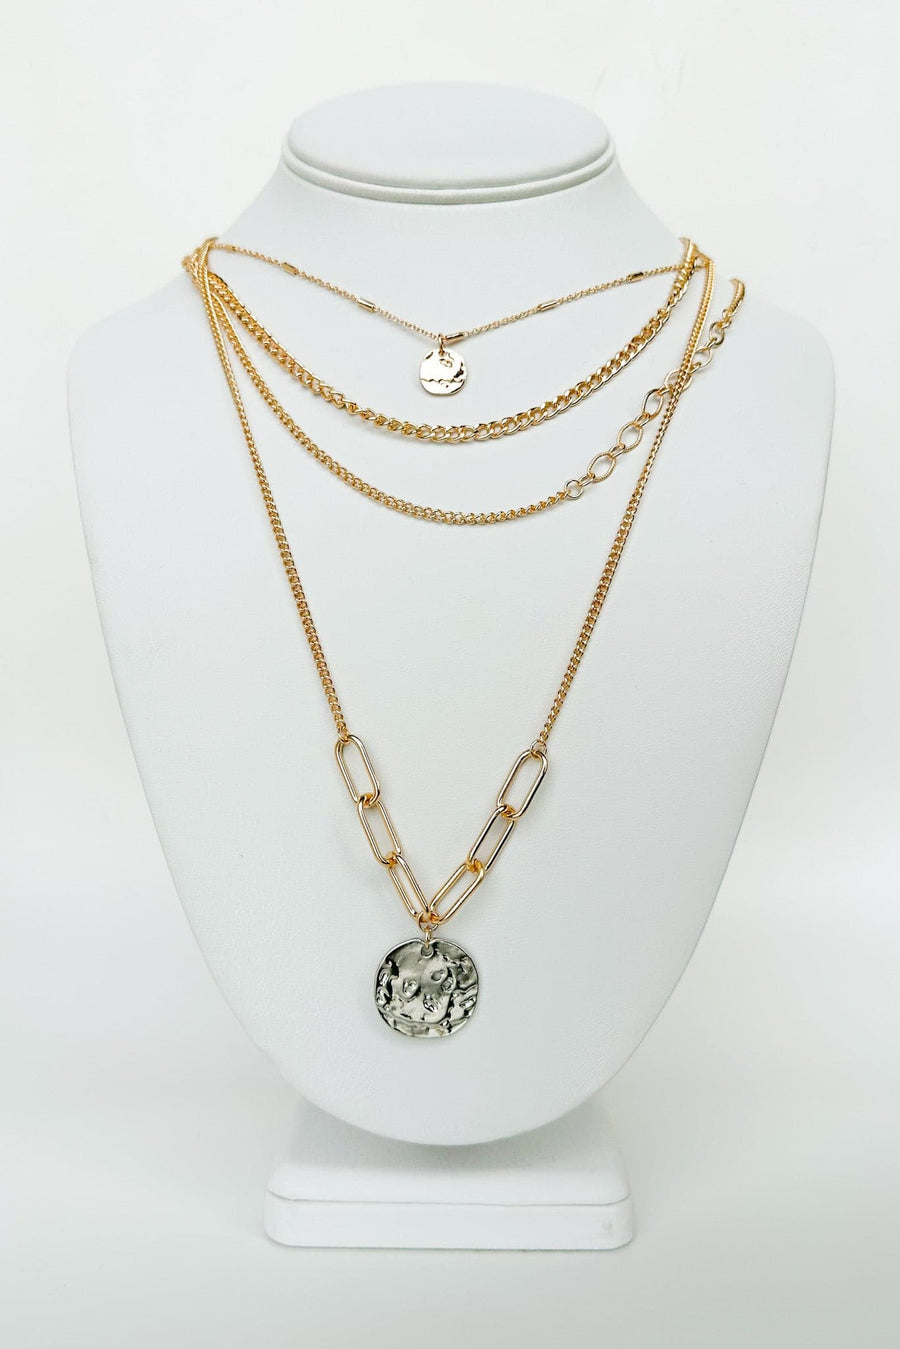 Gold Altah Chain Layered Coin Necklace - kitchencabinetmagic